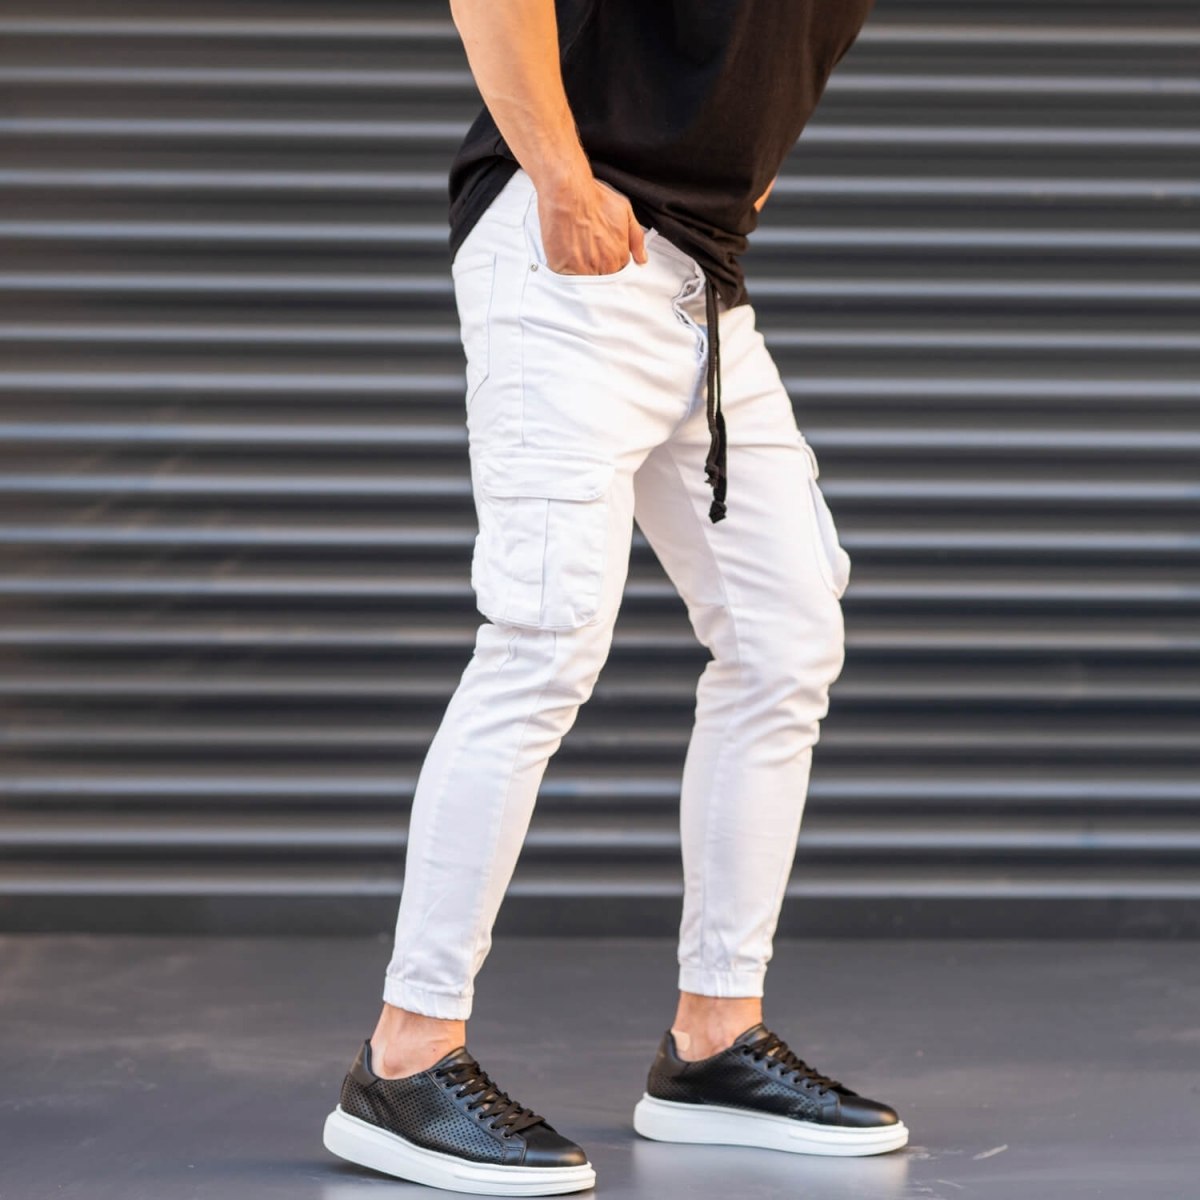 Men's Jeans with Pockets Style in White